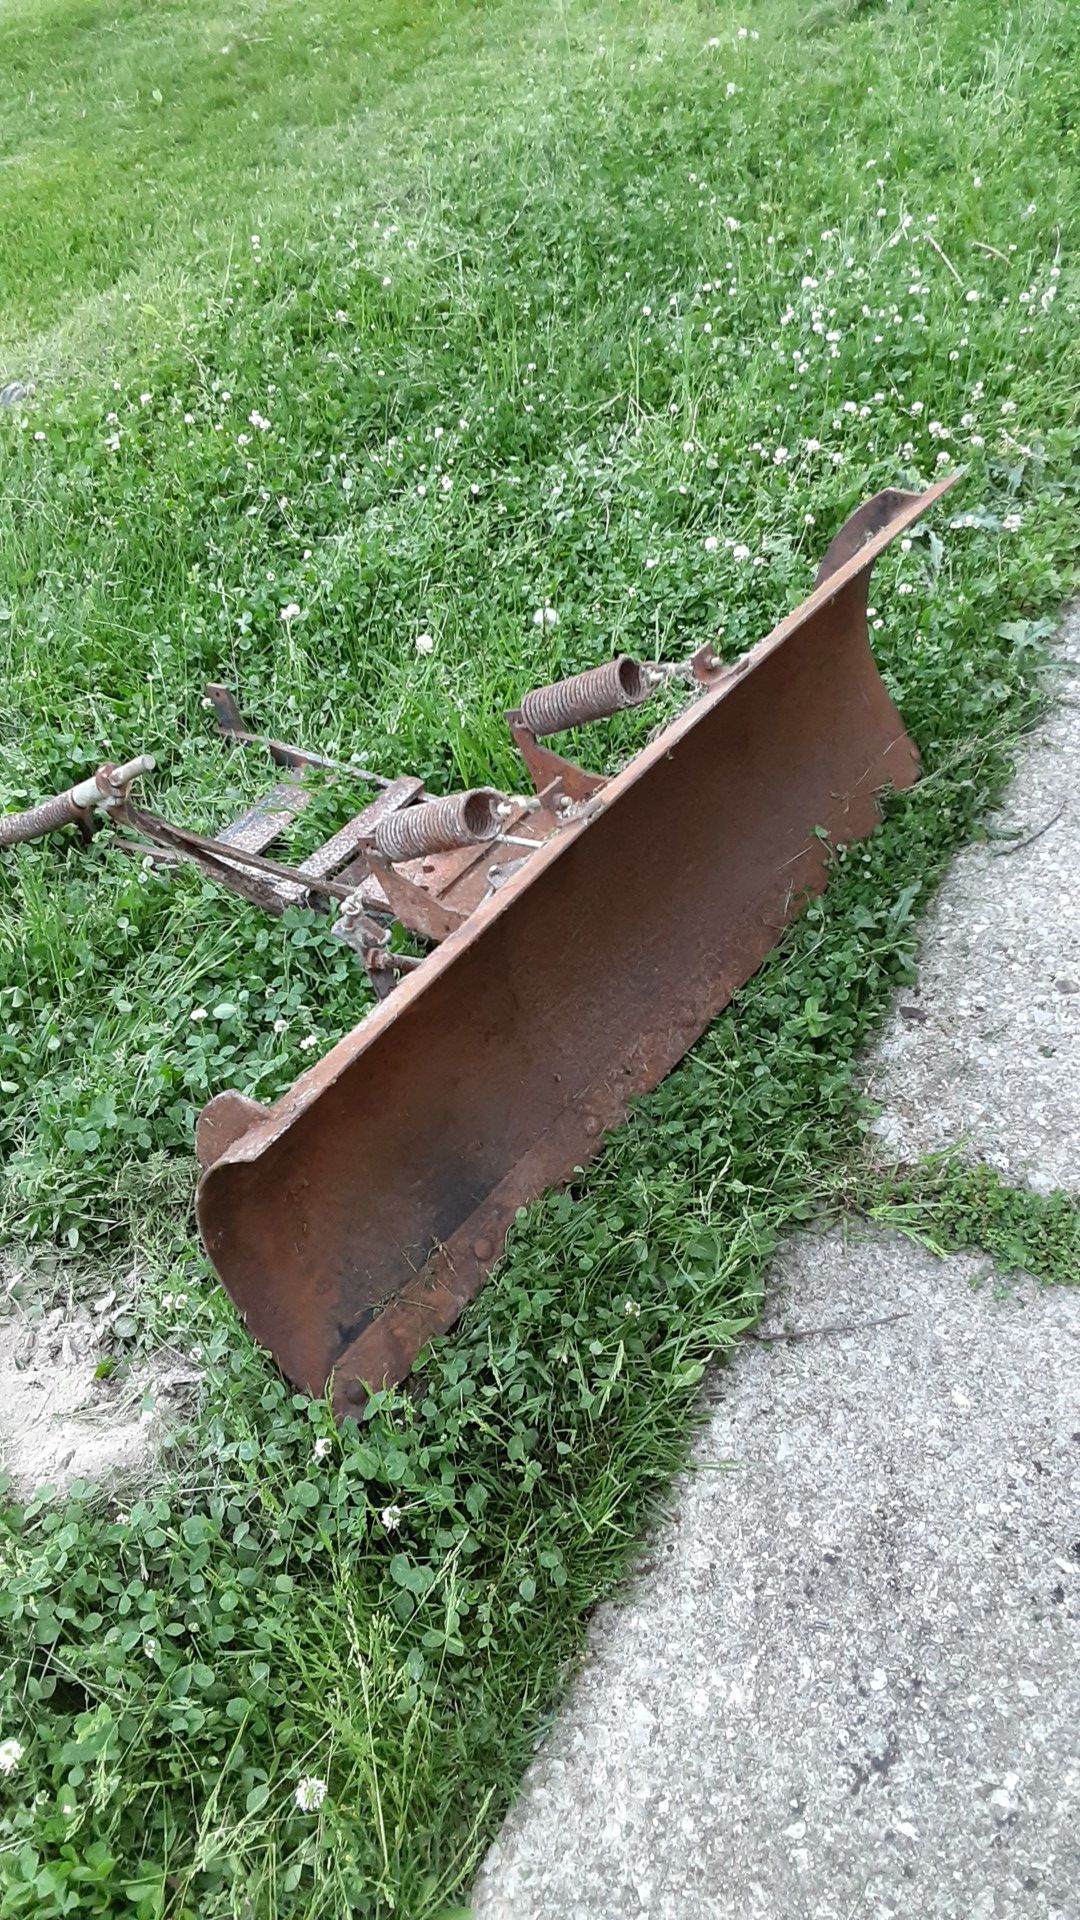 Plow for a tractor